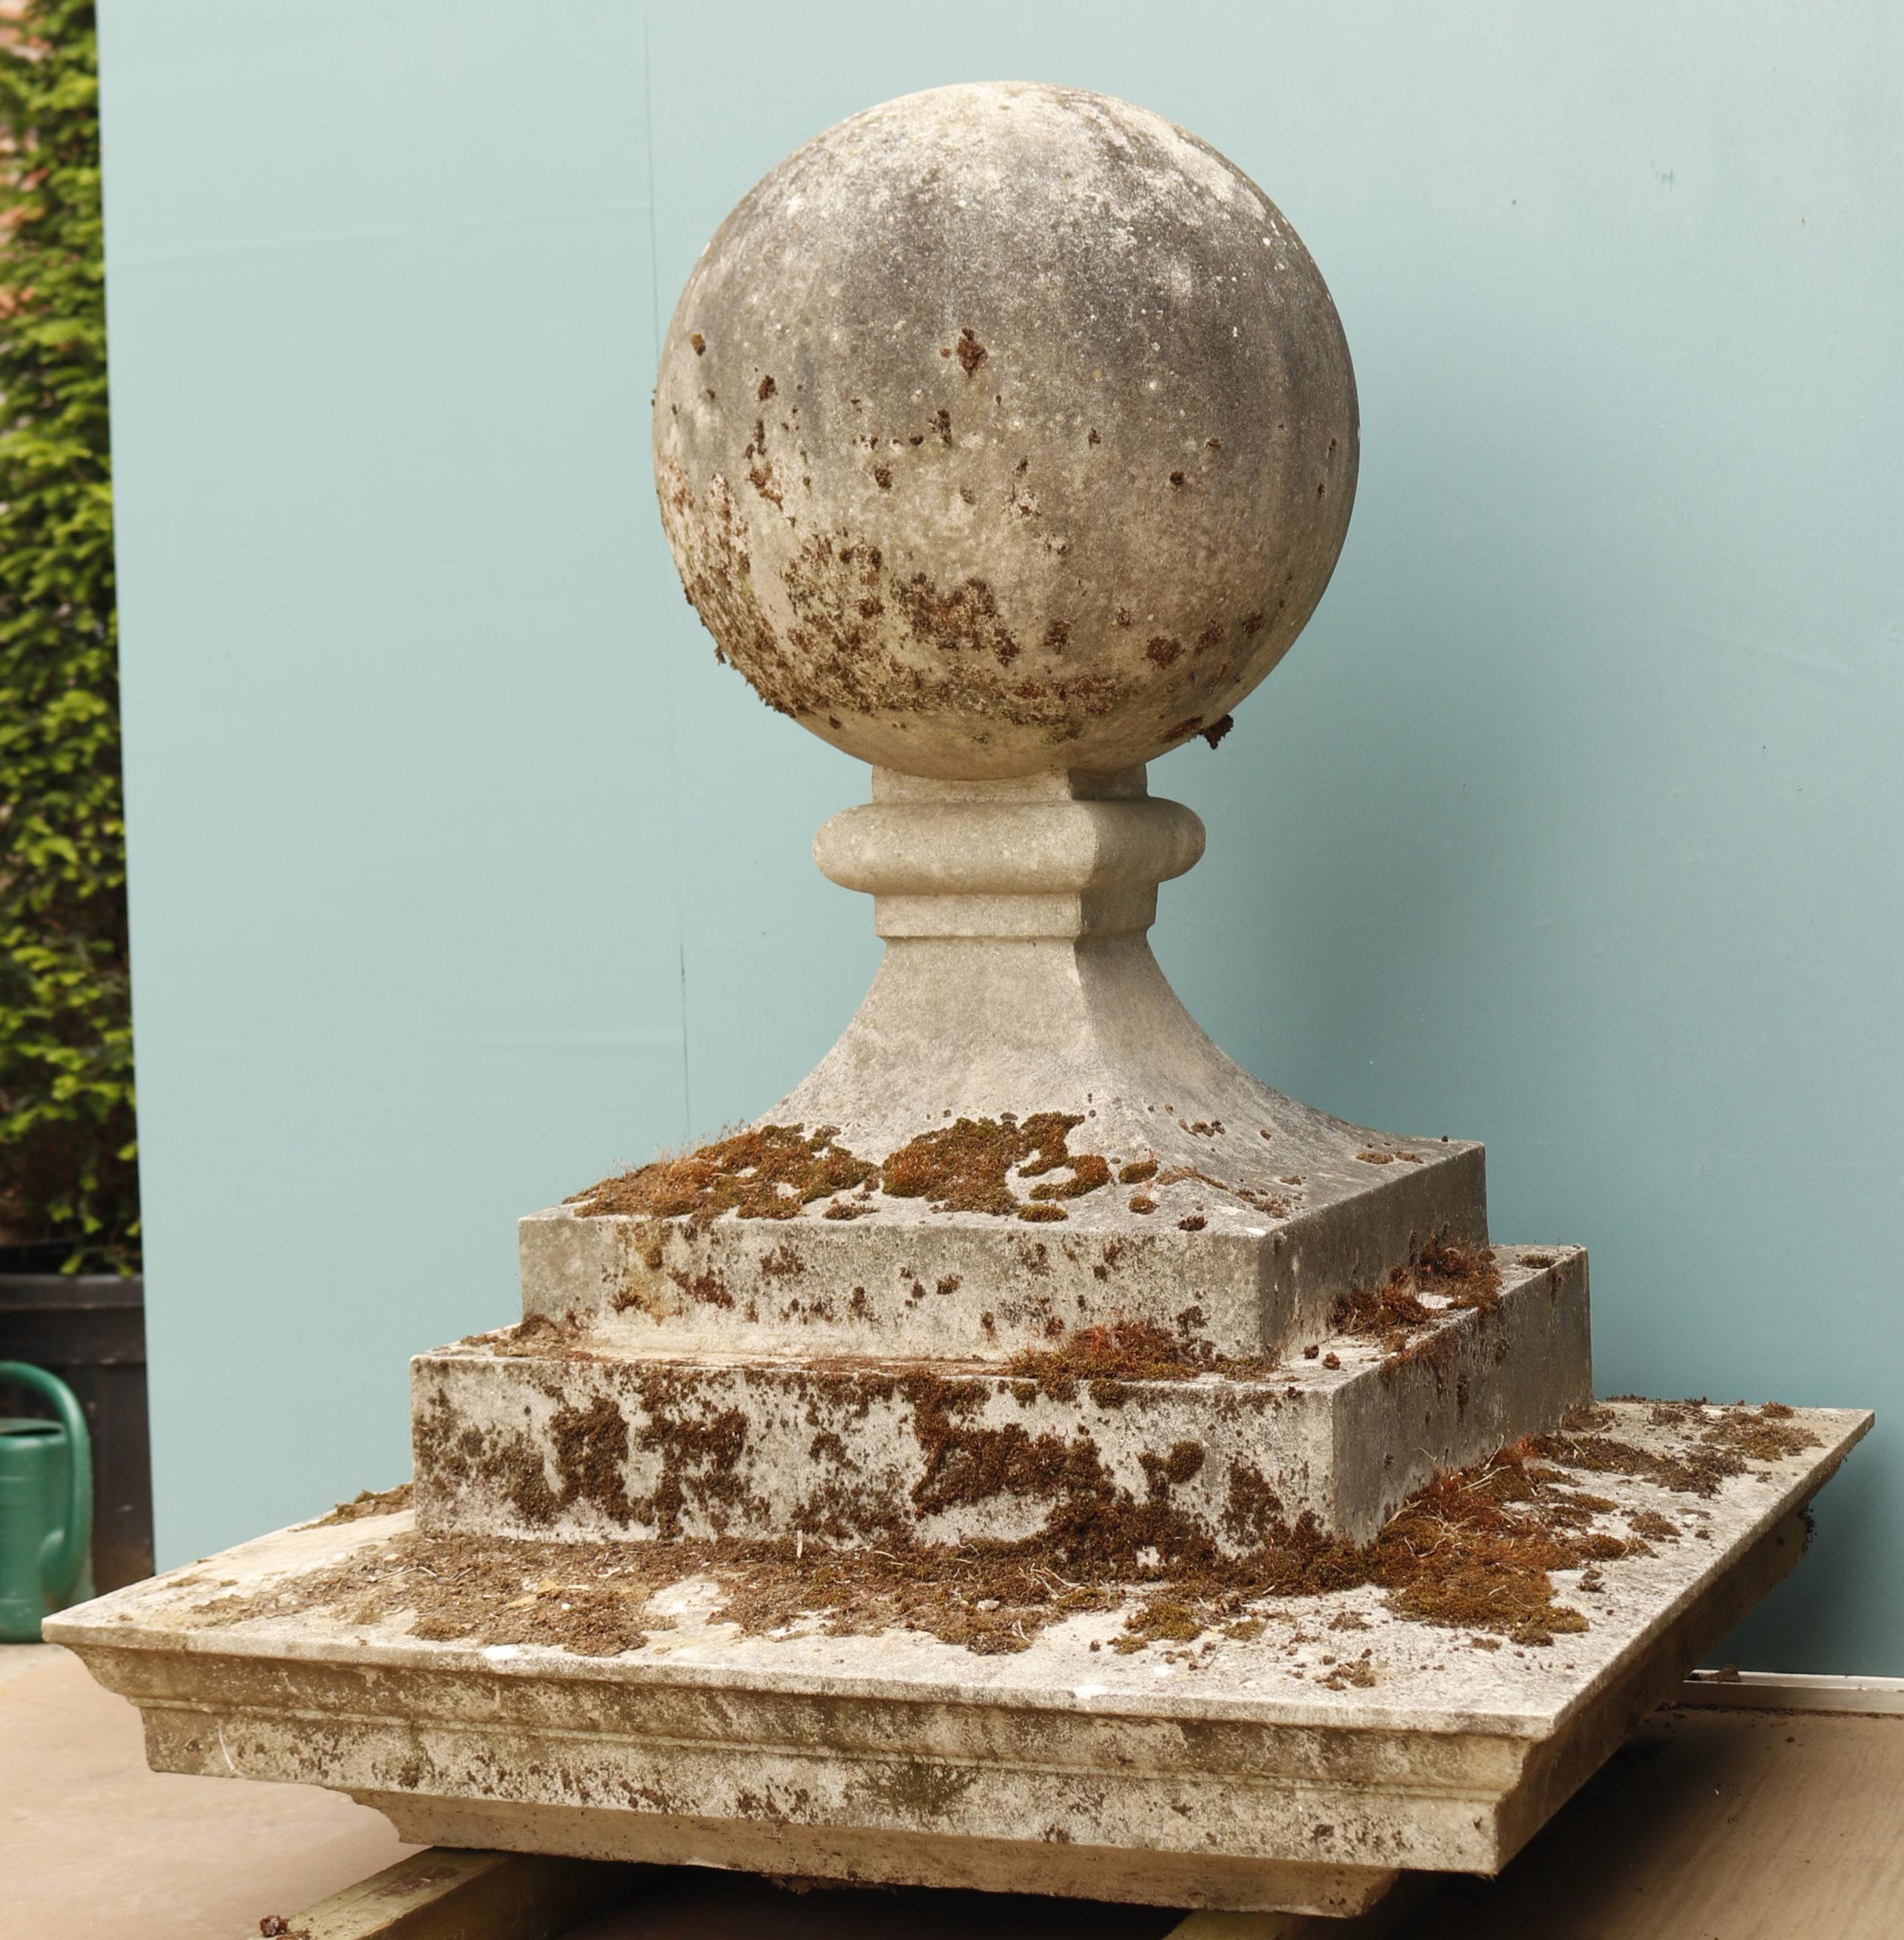 Two Reclaimed stone ball Pier caps. An impressive pair of Antique style Composition stone Ball pier caps.

These have a weathered appearance with moss, and would make a striking entrance to any property.

Additional dimensions

Pier base size